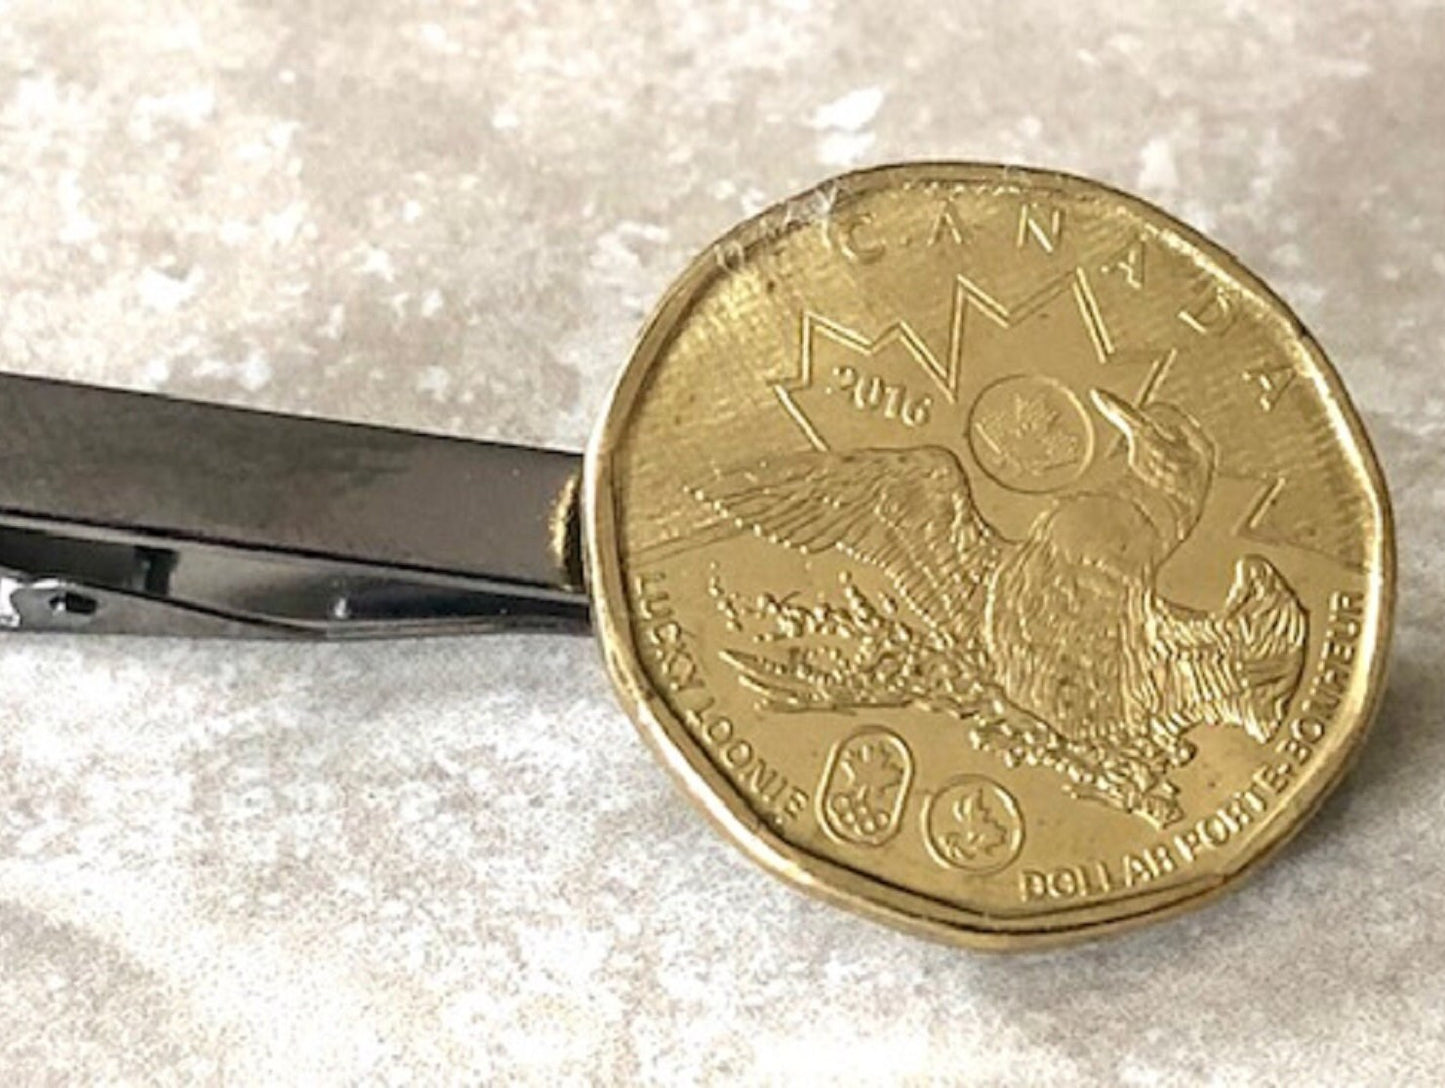 Canada Coin Tie Clip Canadian Lucky Loonie Custom Made Charm Gift For Friend Coin Charm Gift For Him Coin Collector, World Coins Suite & Tie